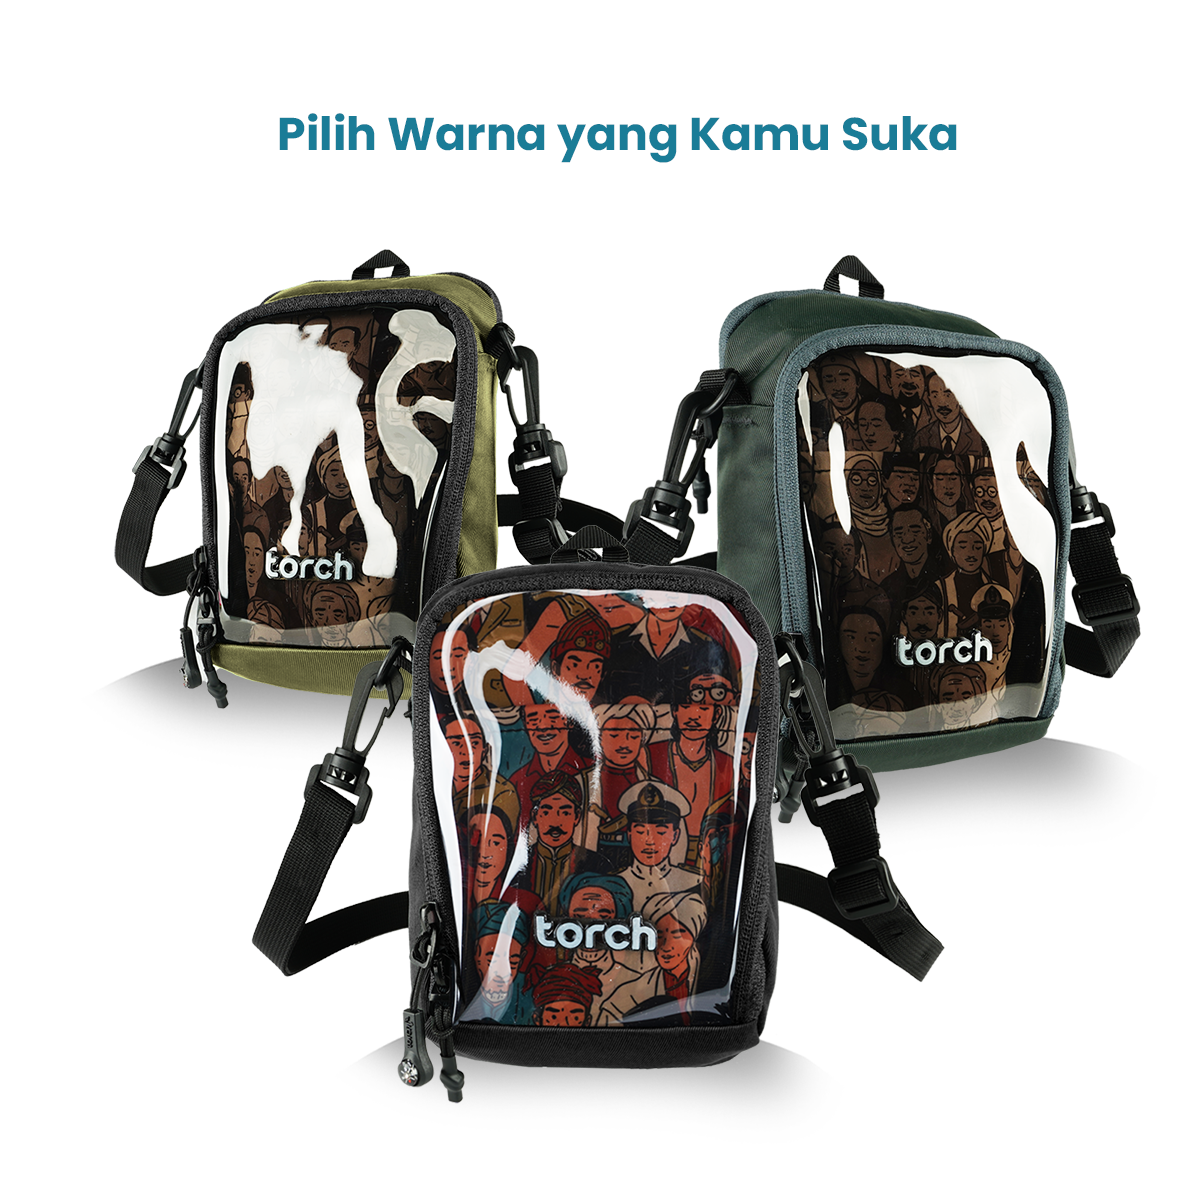 Juang Travel Pouch